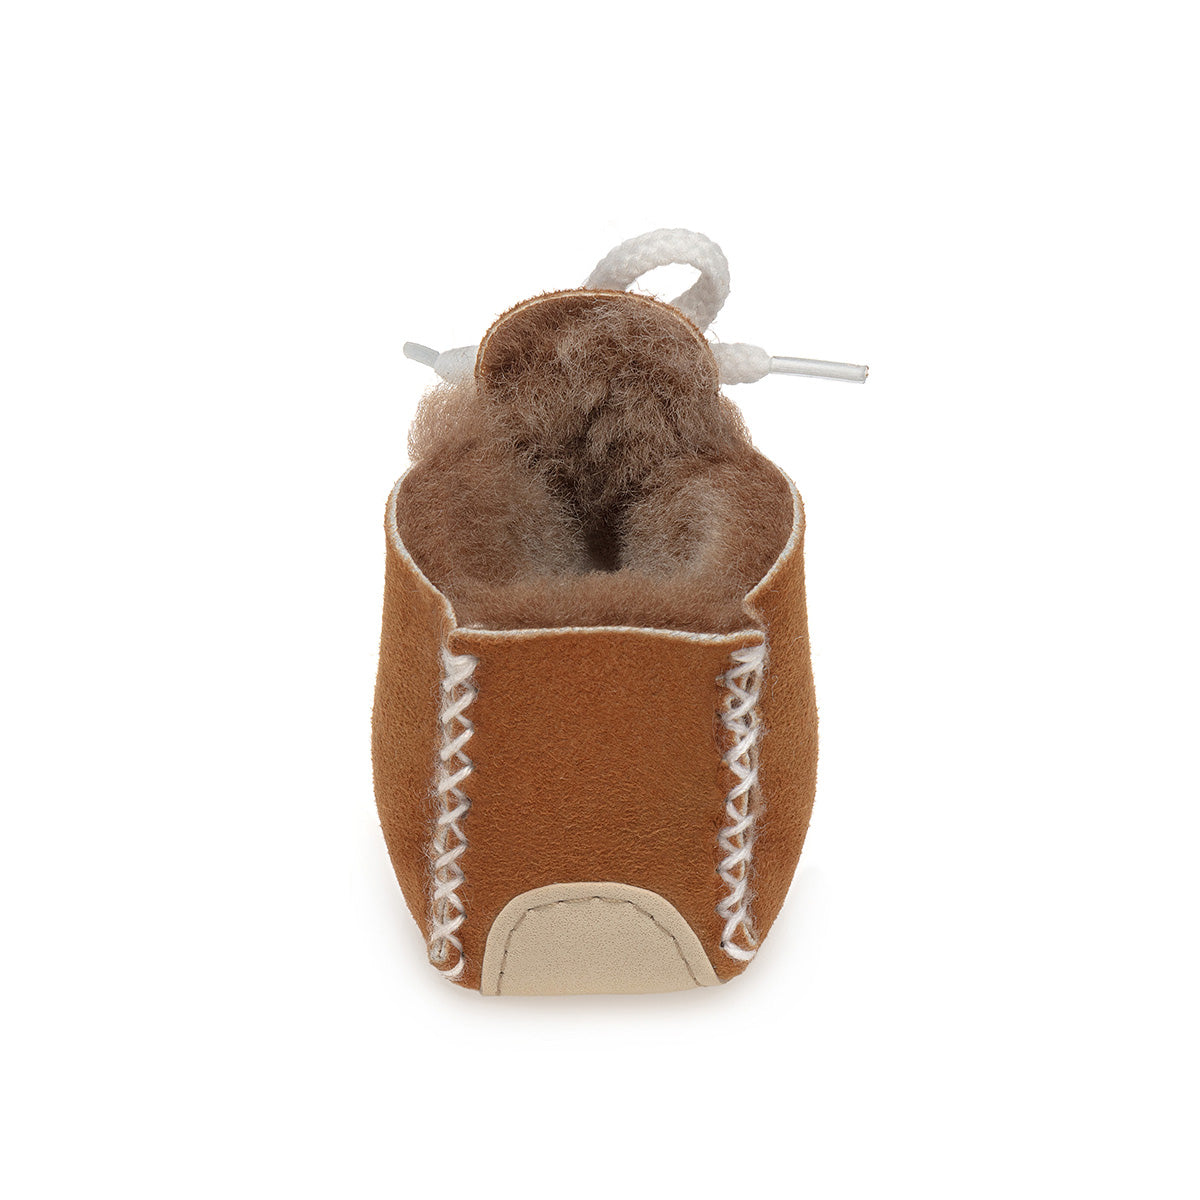 Lupe Hand-Stitched Sheepskin Baby Booties - Honey